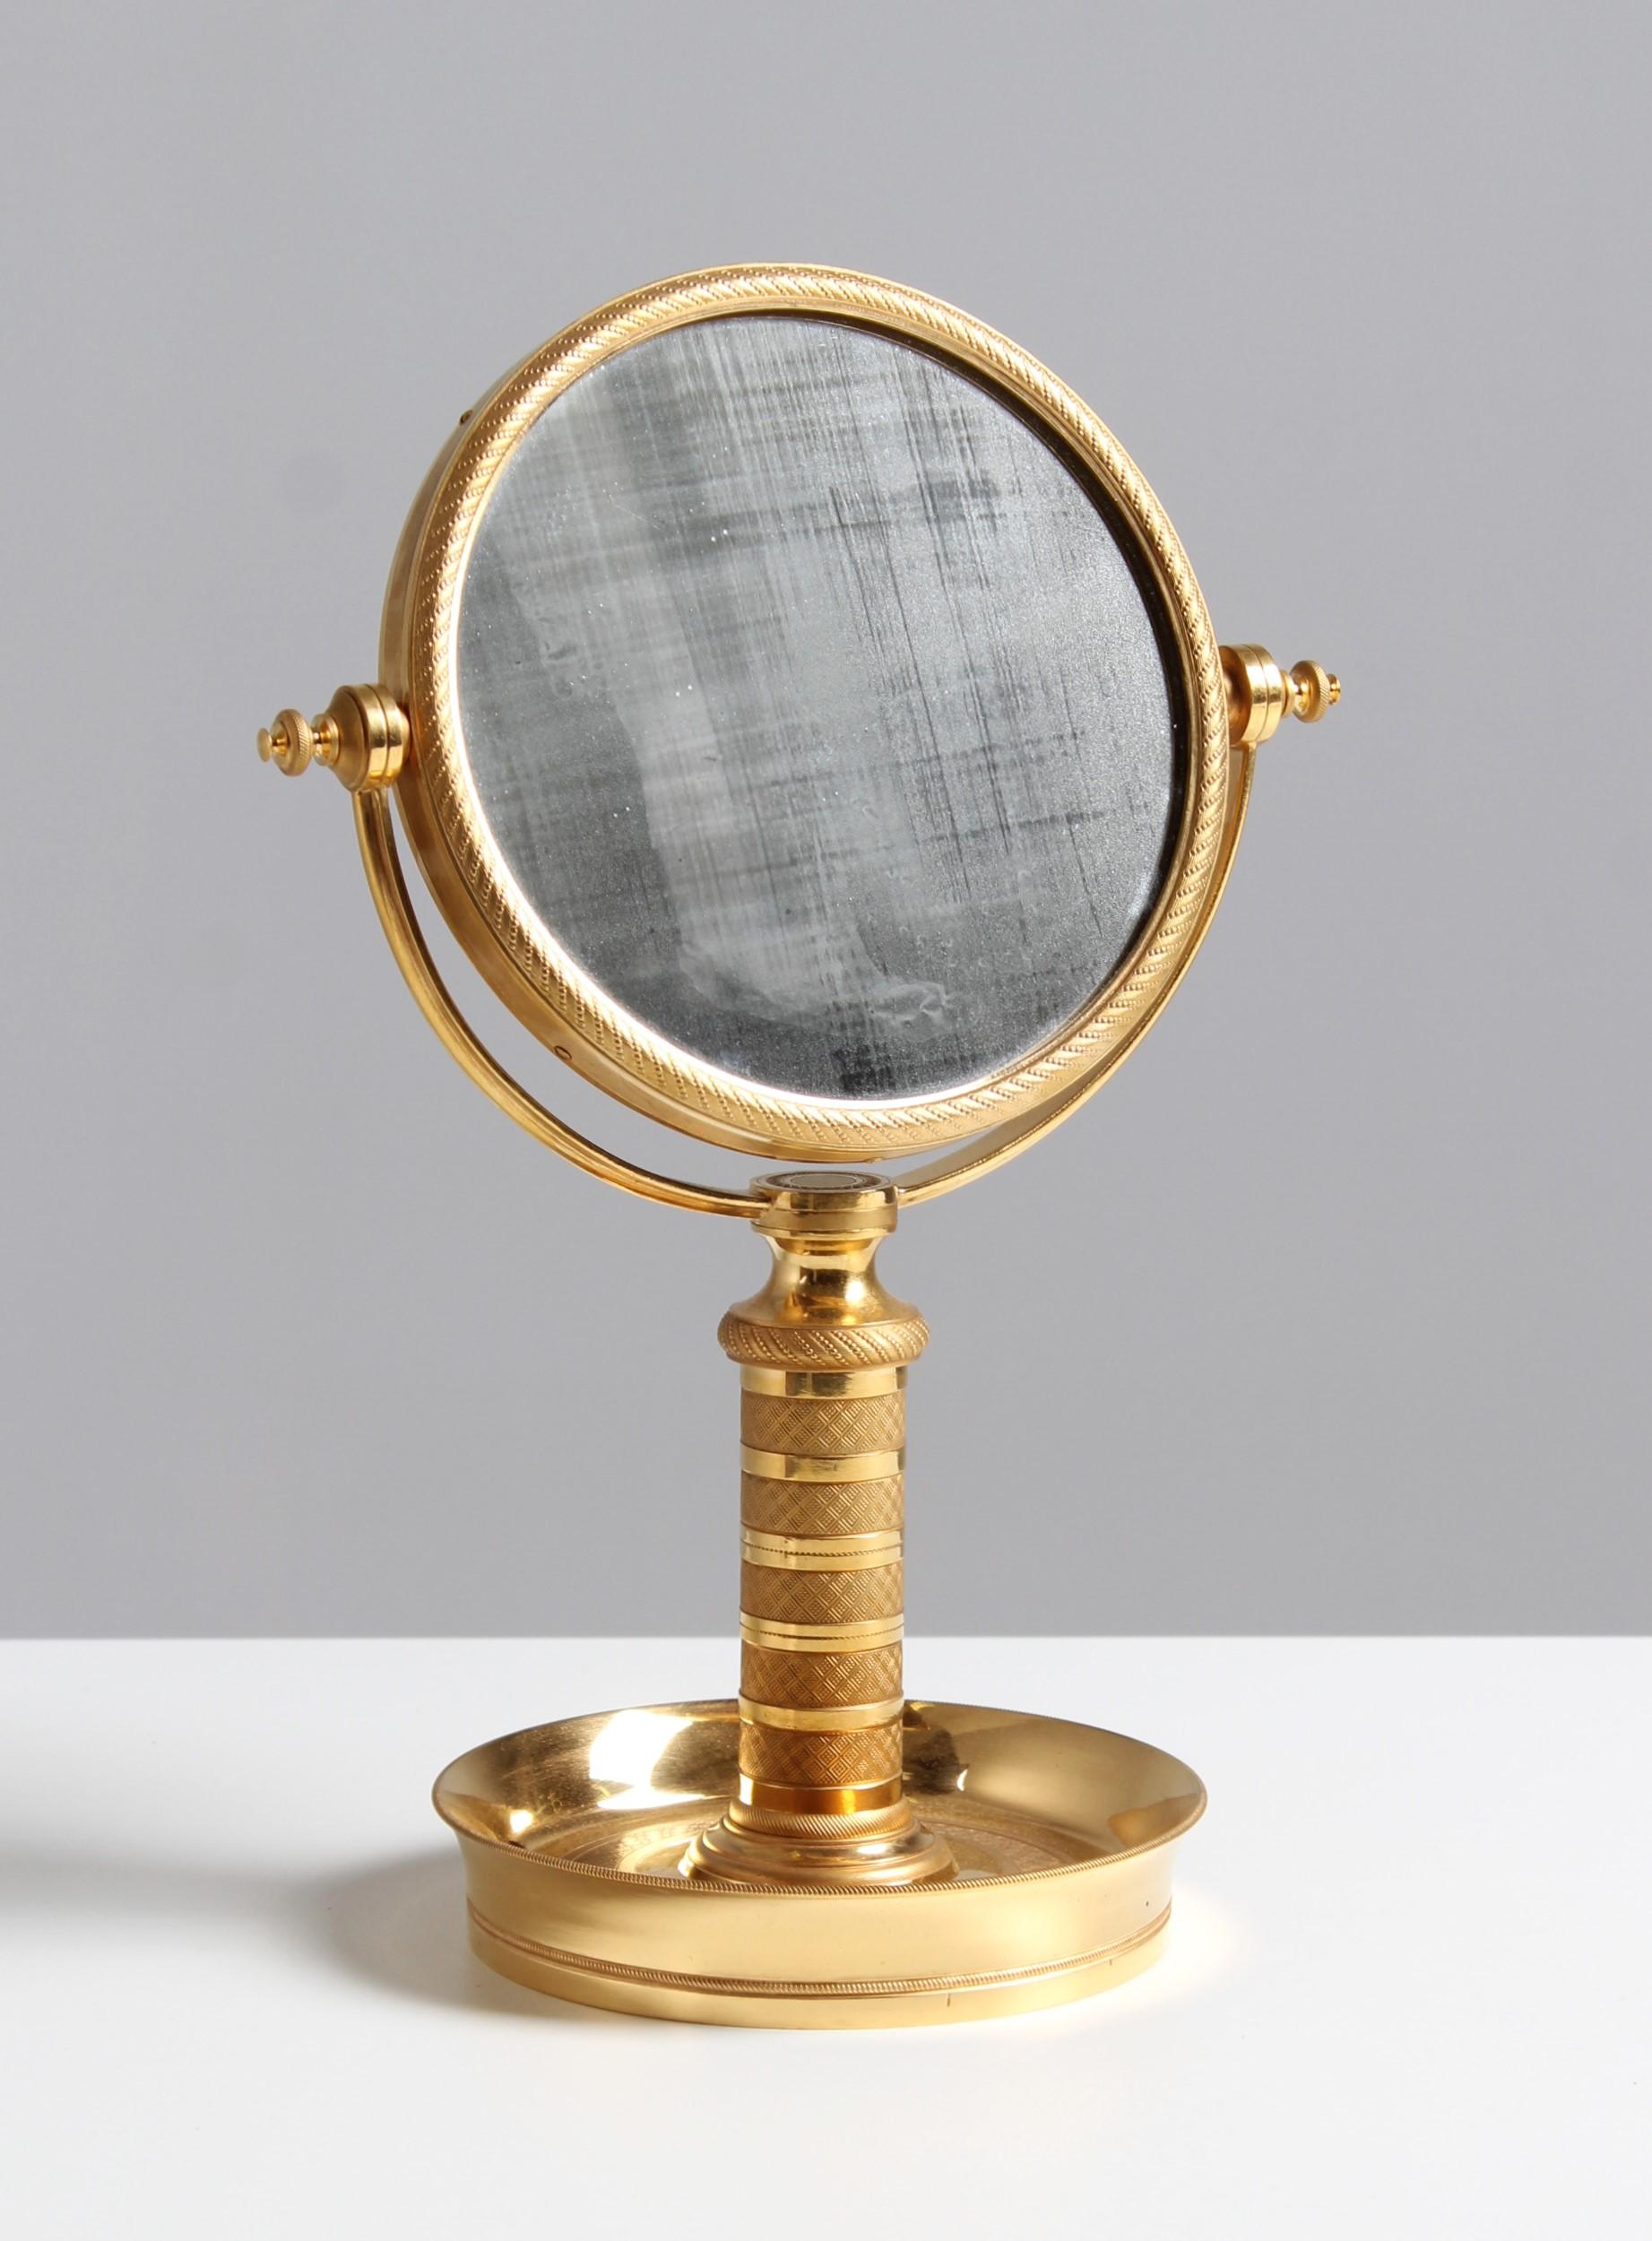 Antique table mirror

France
Bronze gilded
Empire, late 19th century

Dimensions: H x W x D: 34 x 24 x 16 cm

Description:
Extremely rare and very high quality made make-up mirror from the Second Empire period around 1890.

The round base with 16 cm